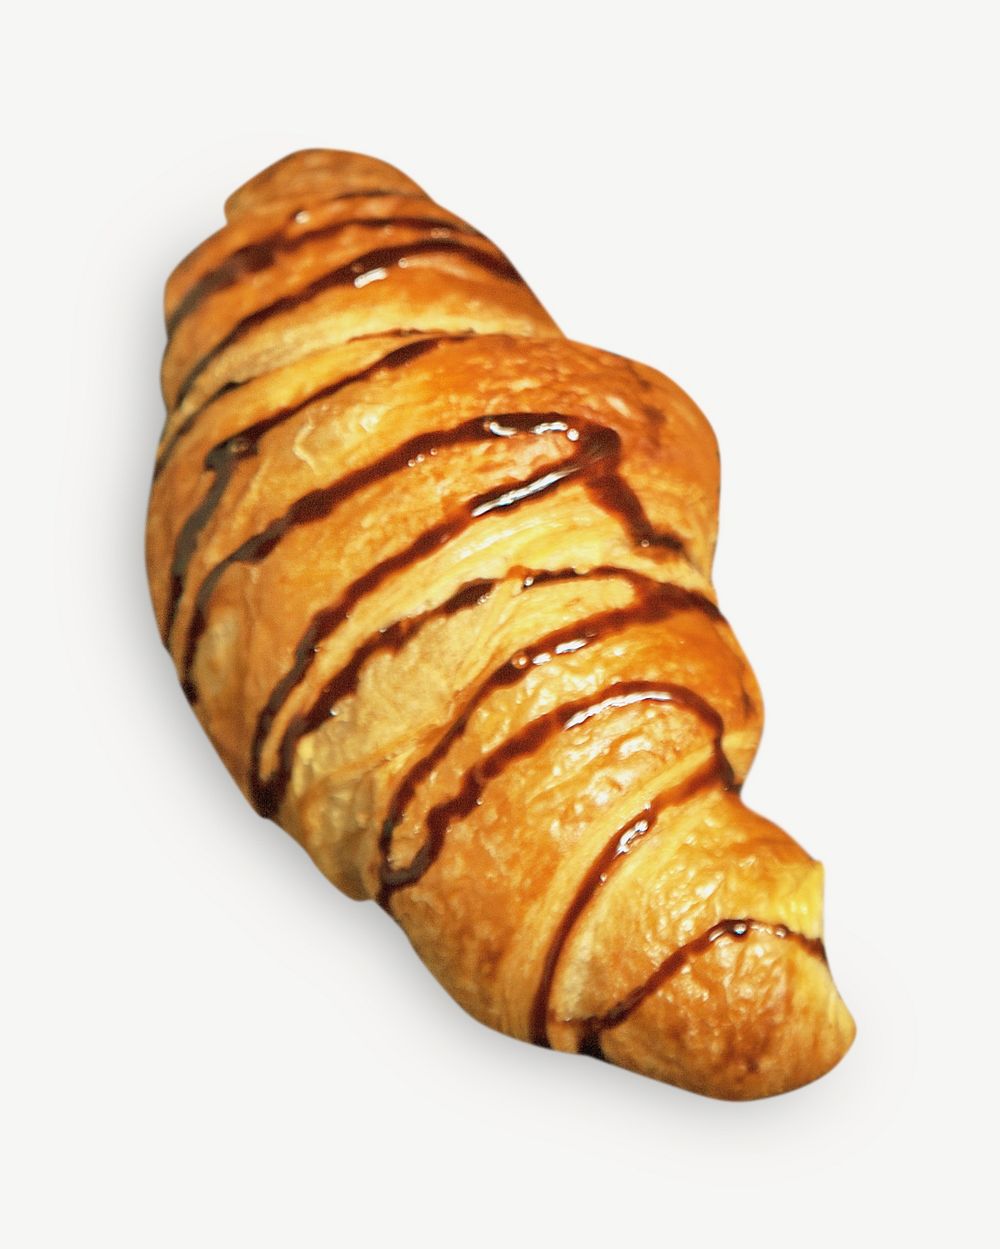 Breakfast pastry French croissant psd